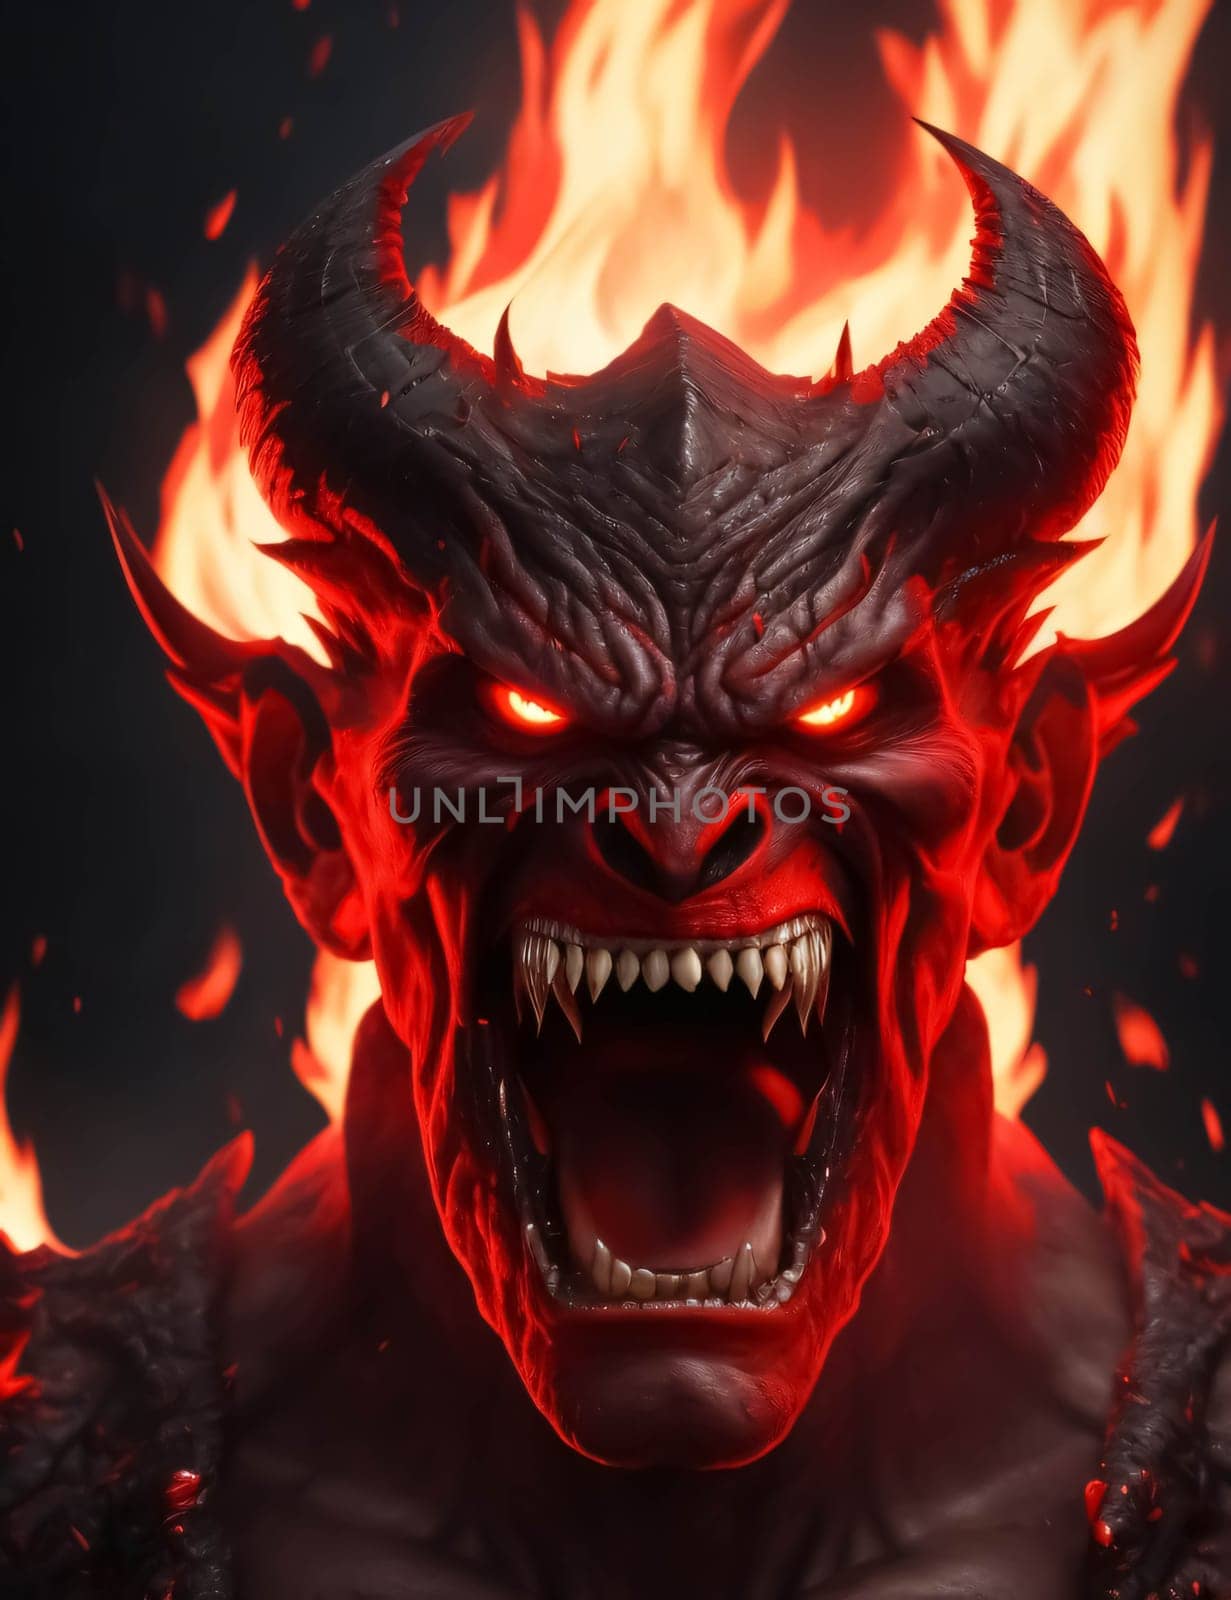 Devil, satan, demon, evil, lucifer, monster in hell and rage, super furious, super scary villain character by antoksena